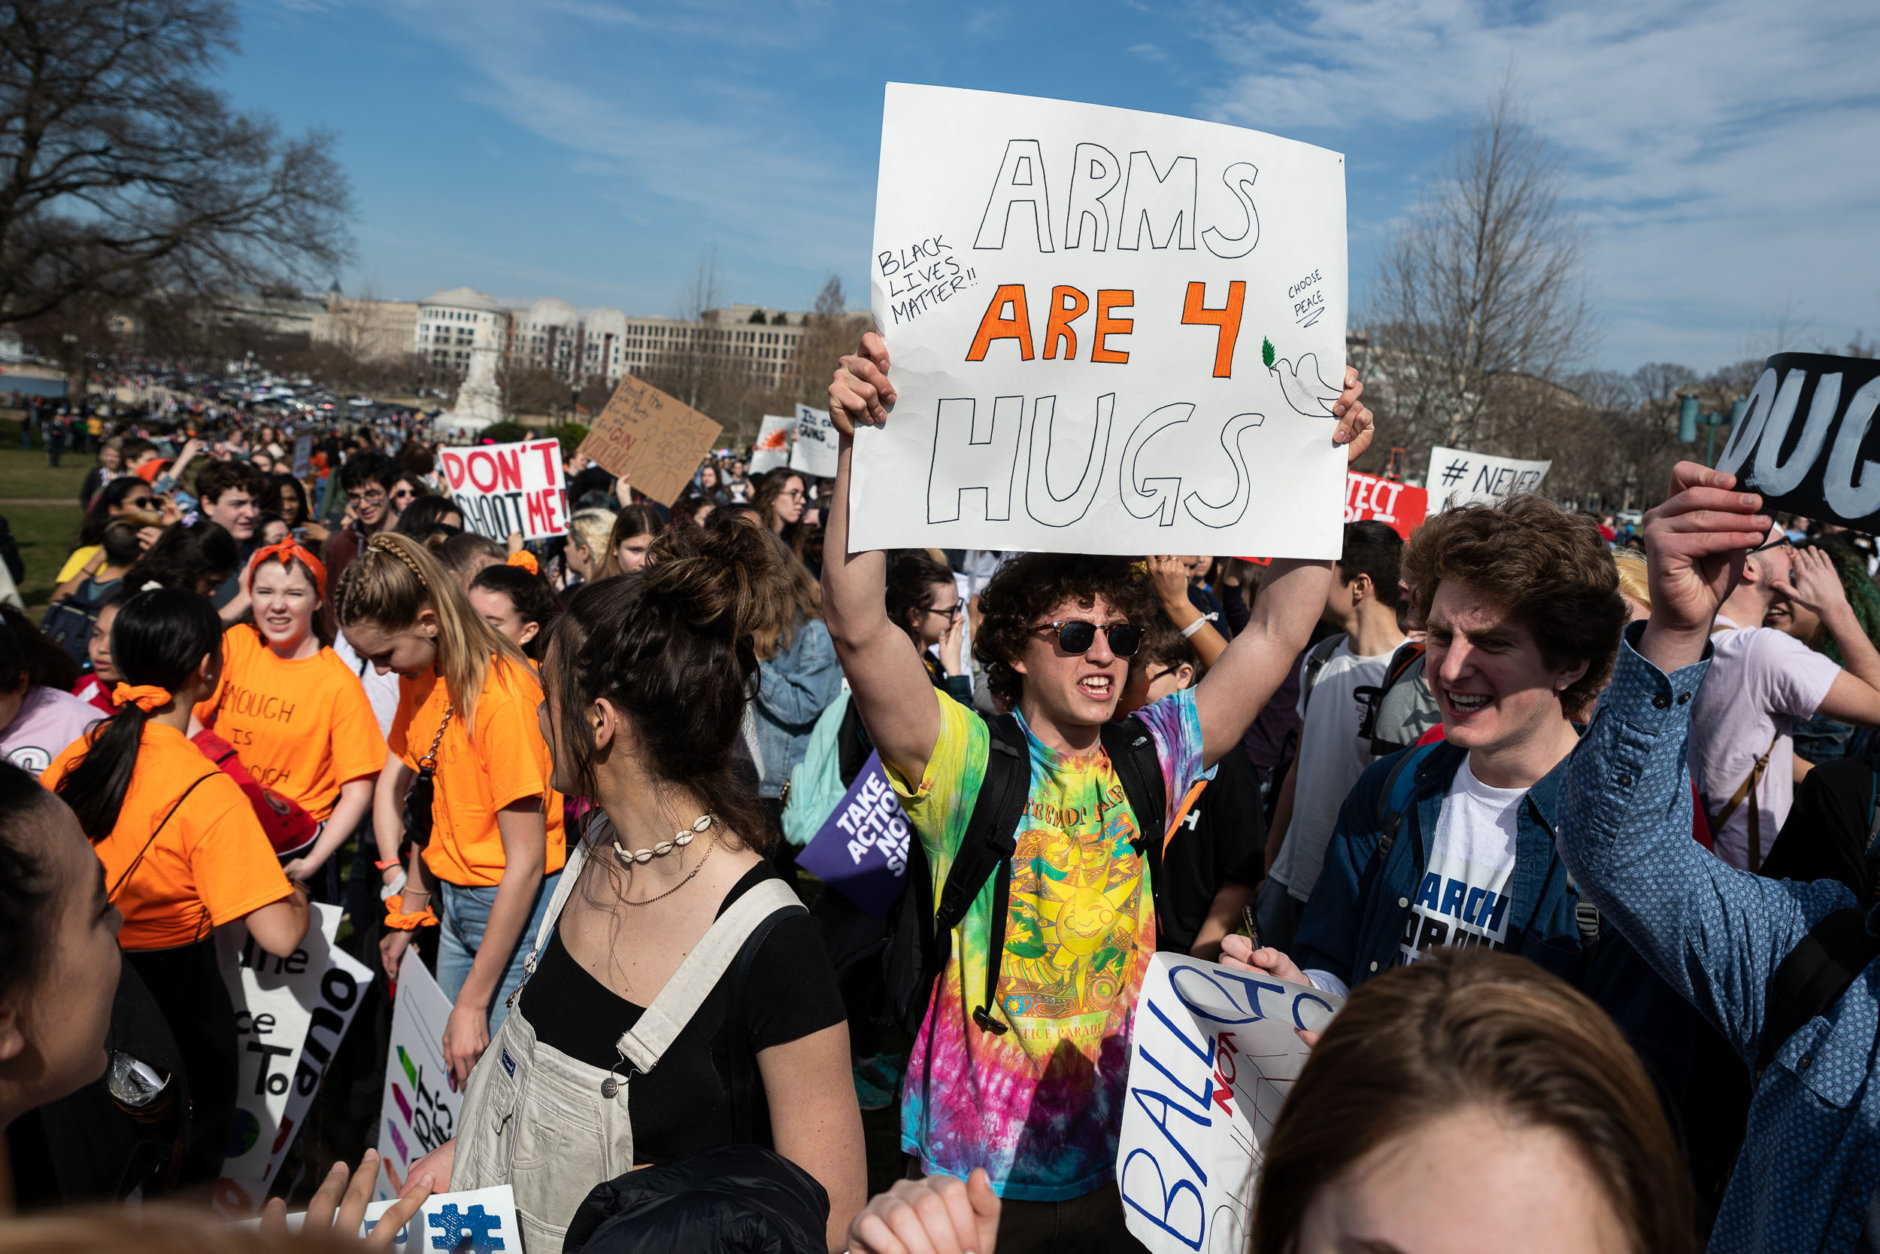 Hundreds of students stream into the Capitol building's west lawn on Thursday afternoon, following a long but fast march from the White House through the heart of downtown D.C. (WTOP/Alejandro Alvarez)